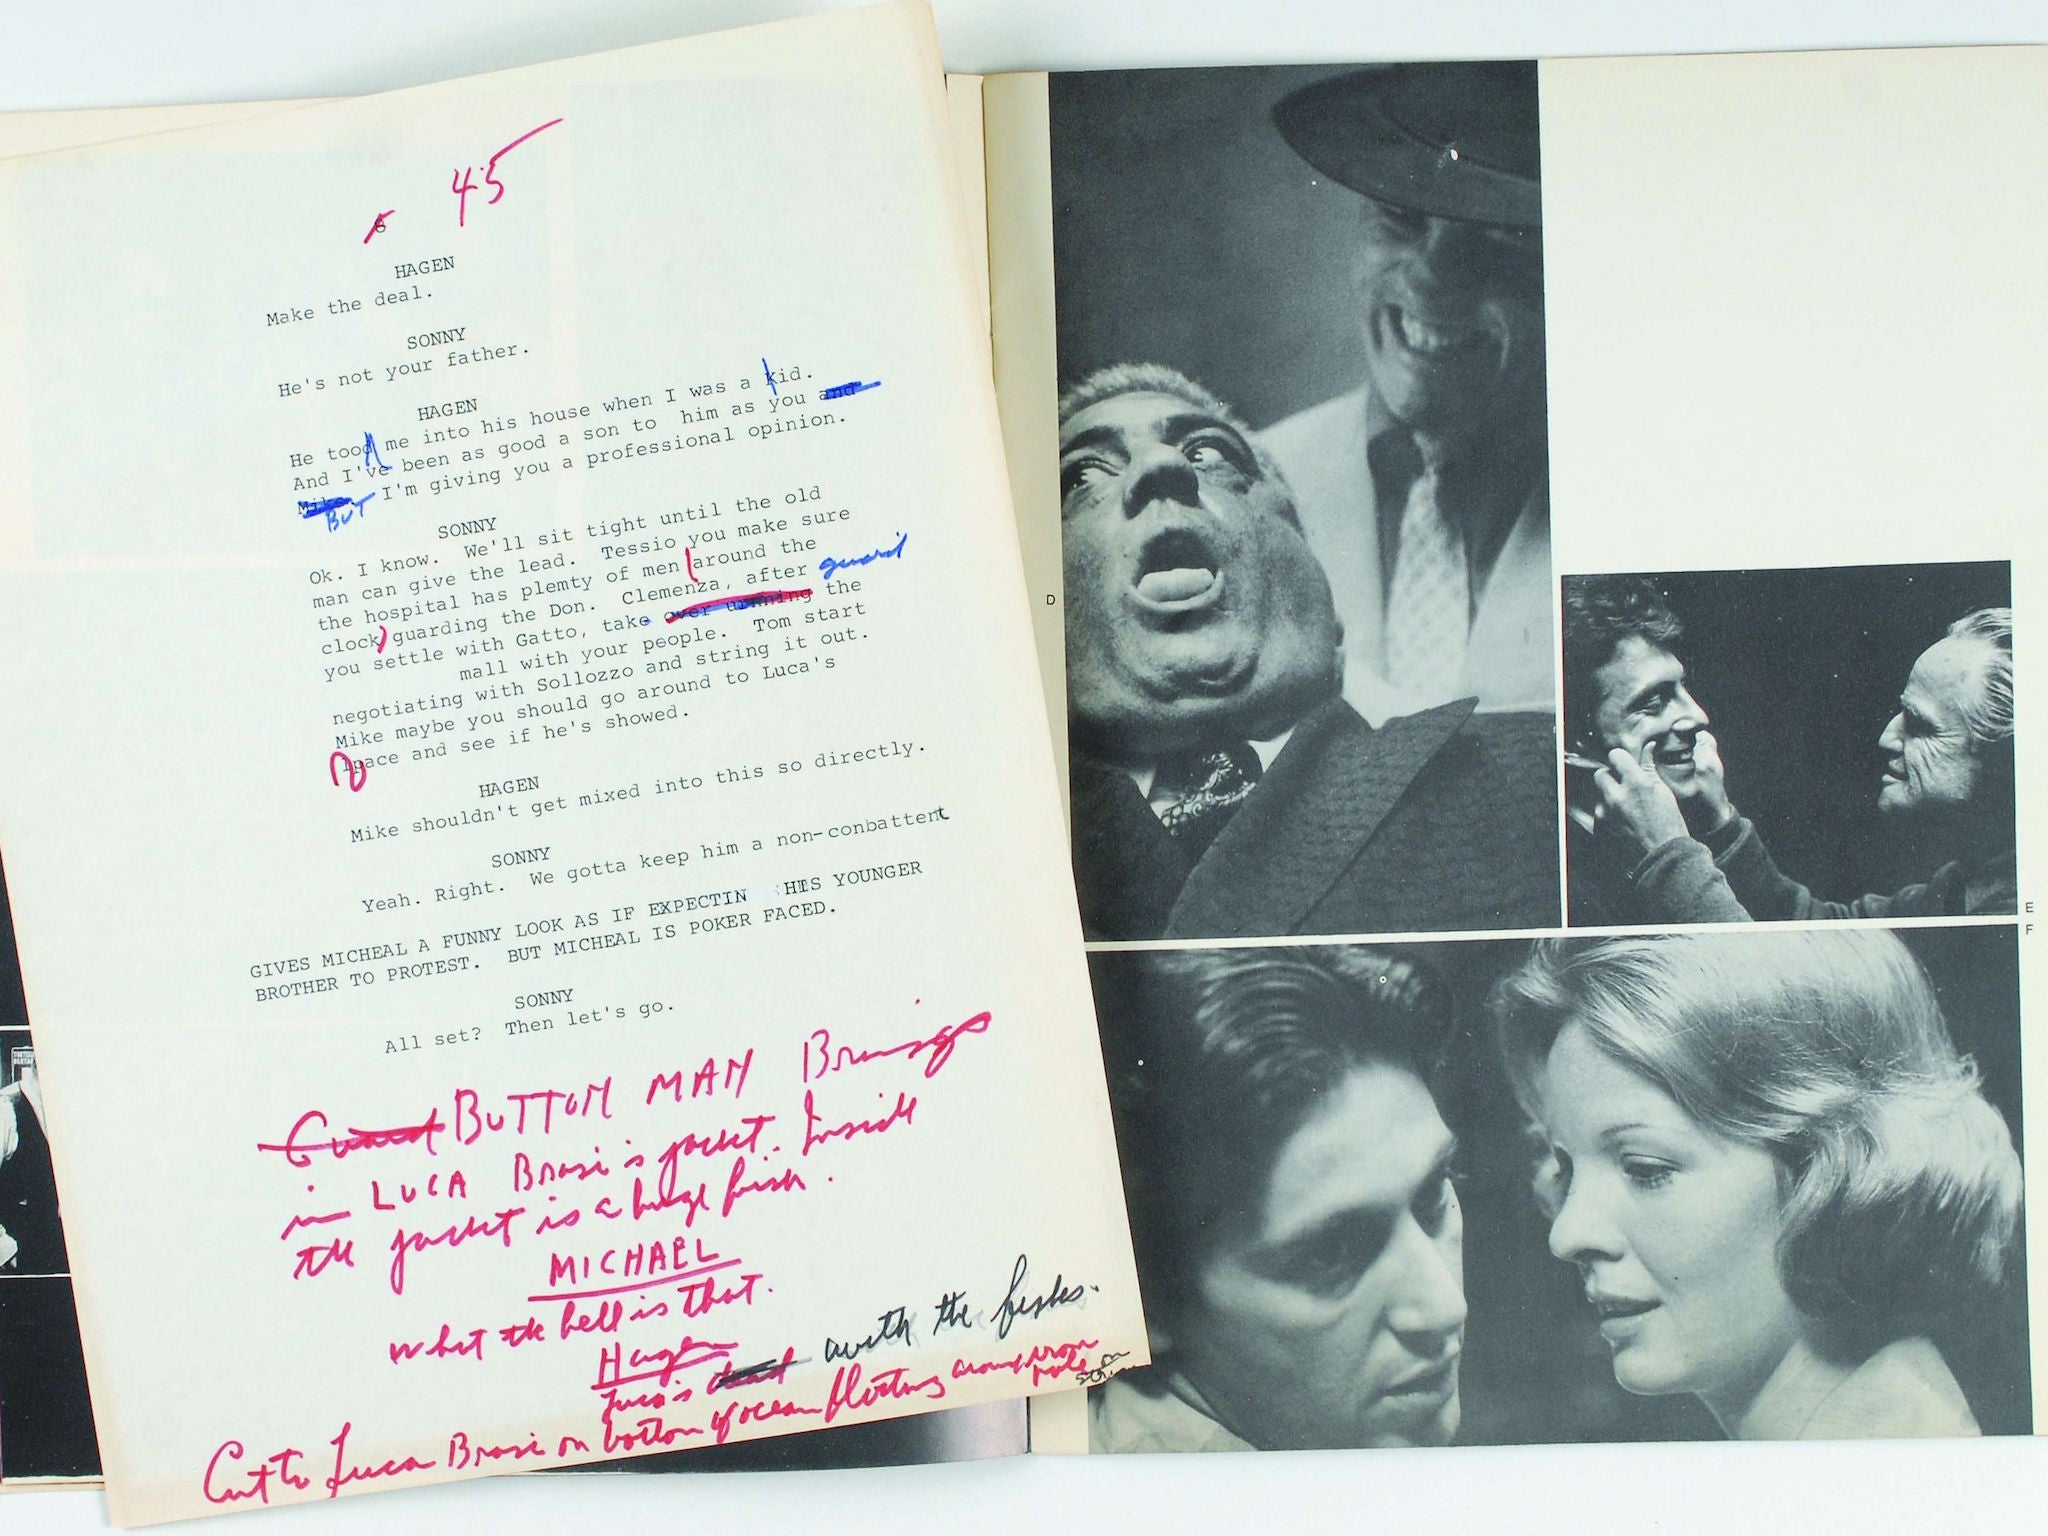 Puzo’s own annotations scrawled on early screenplay drafts for director Francis Ford Coppola